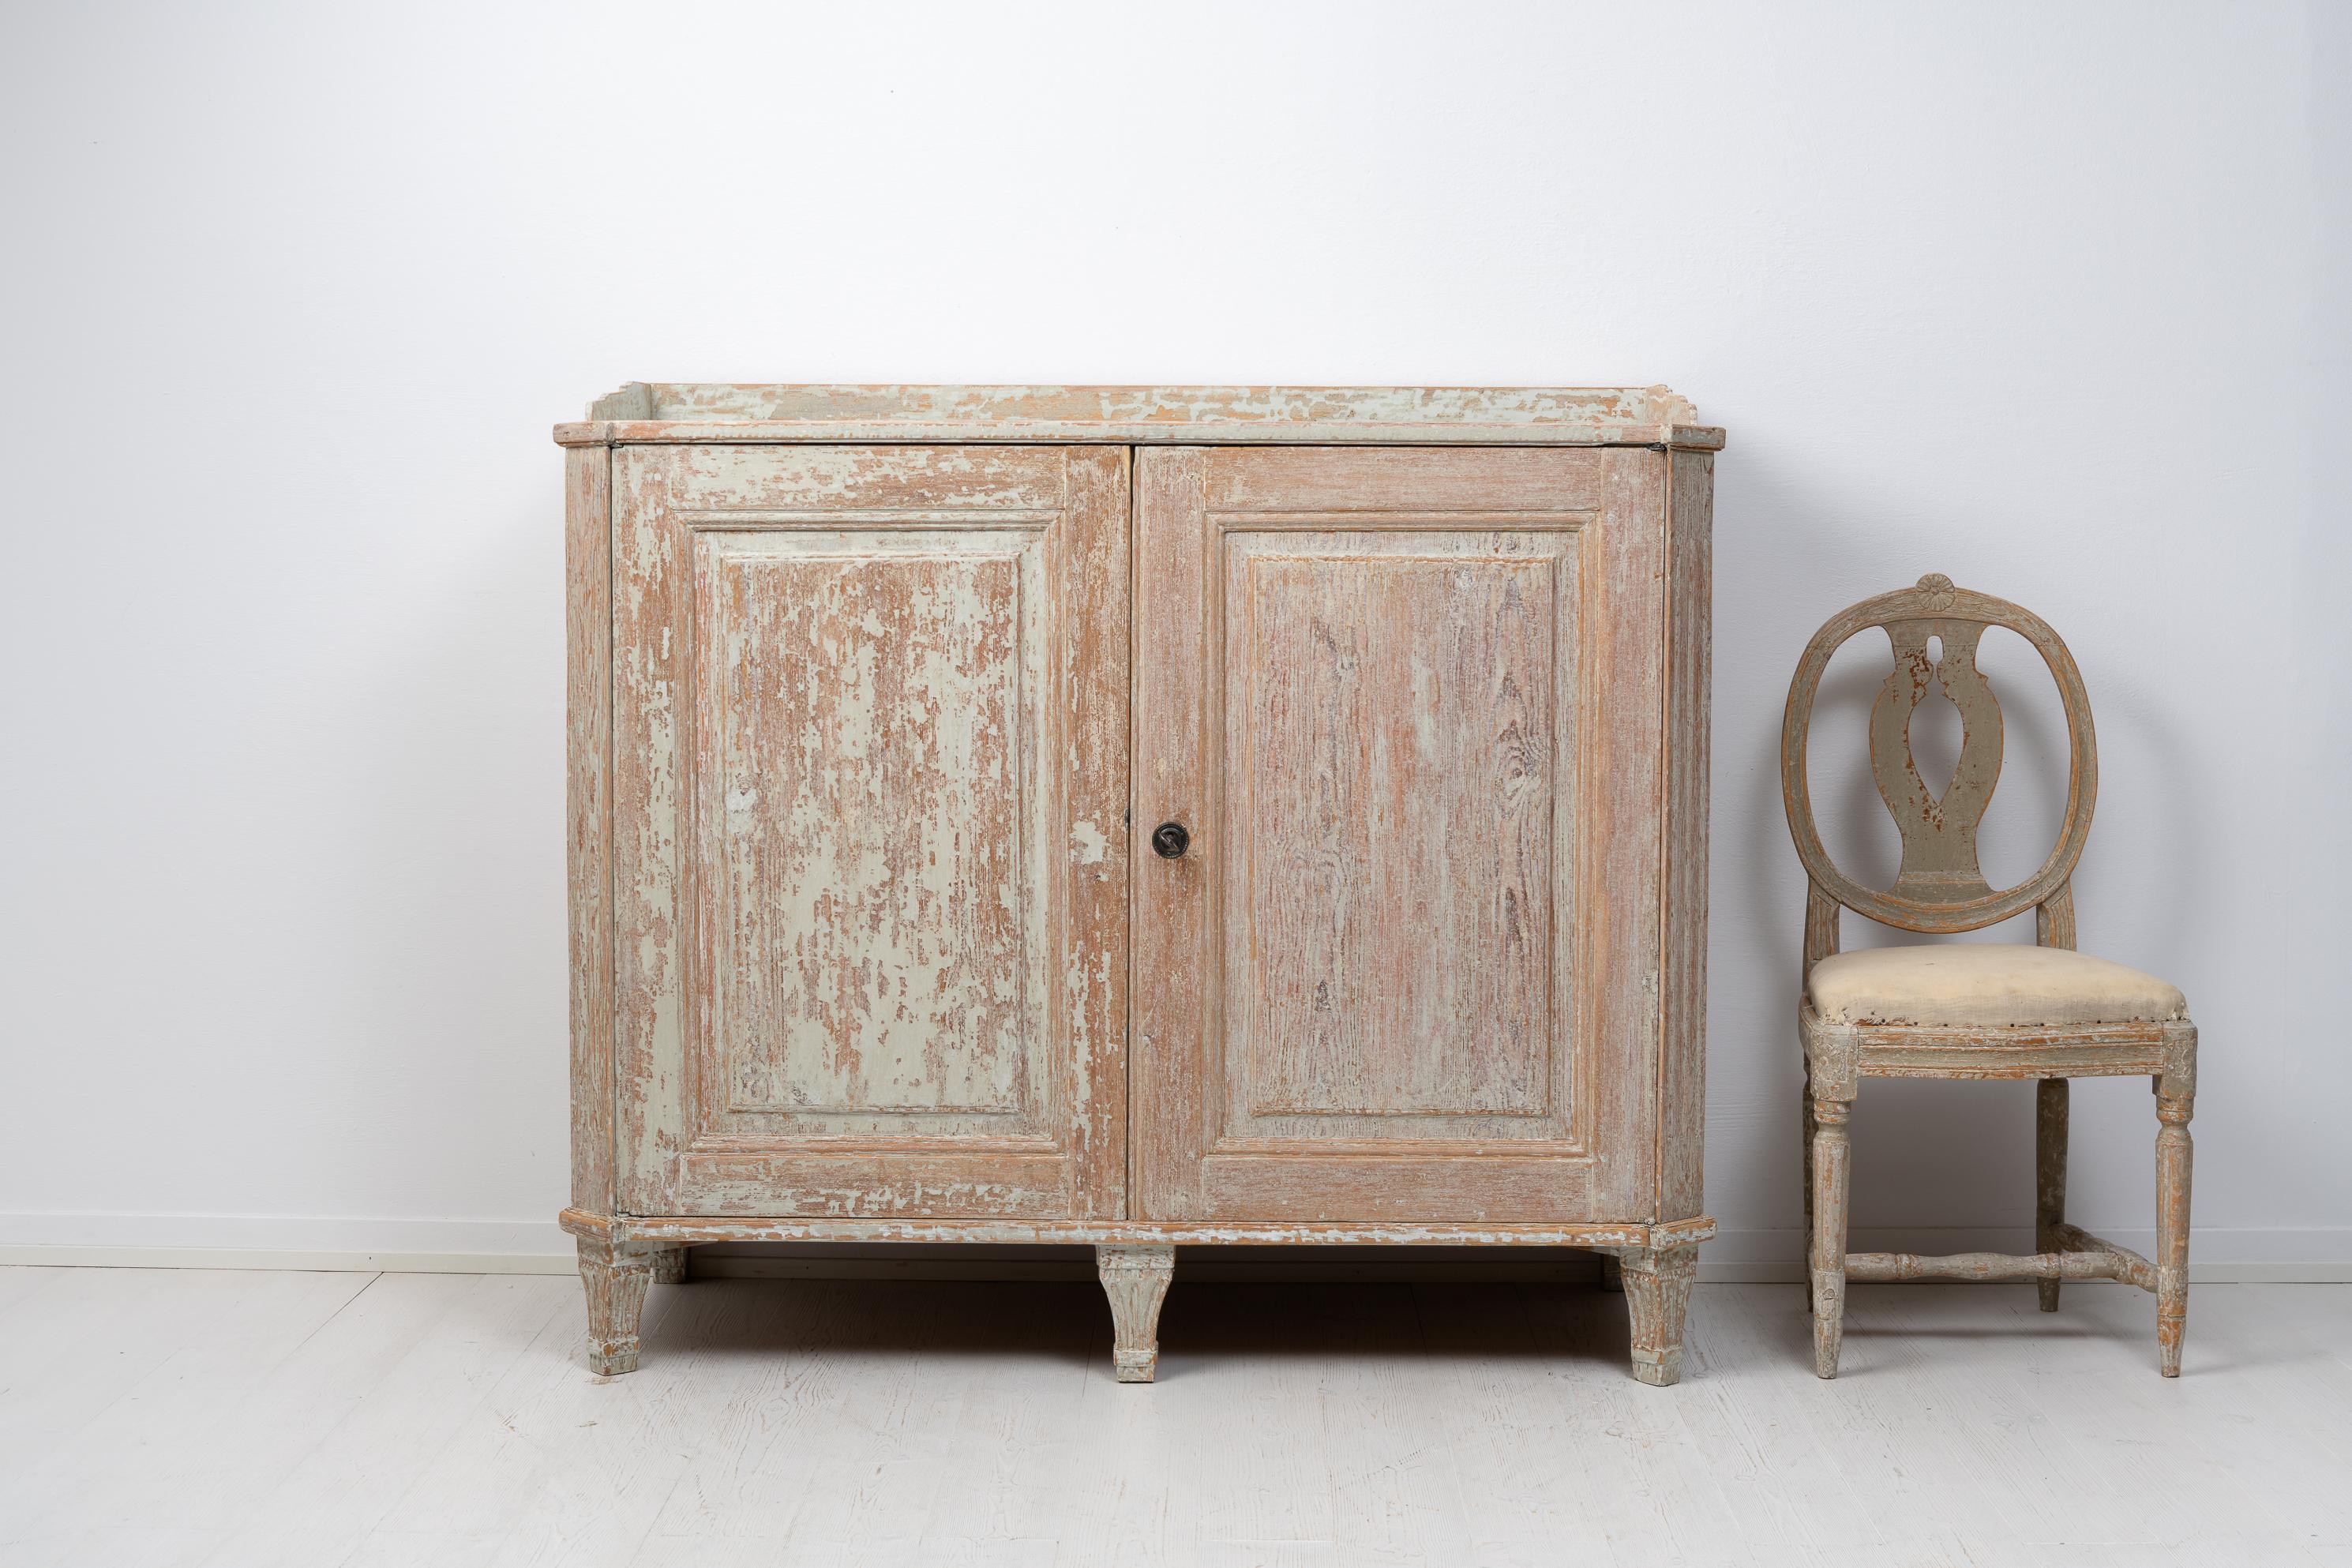 Antique Swedish gustavian sideboard from Northern Sweden made around the year 1800. The sideboard is a genuine gustavian antique with the classic straight shape and angled corners. The corners also have flutes running vertically and the interior of